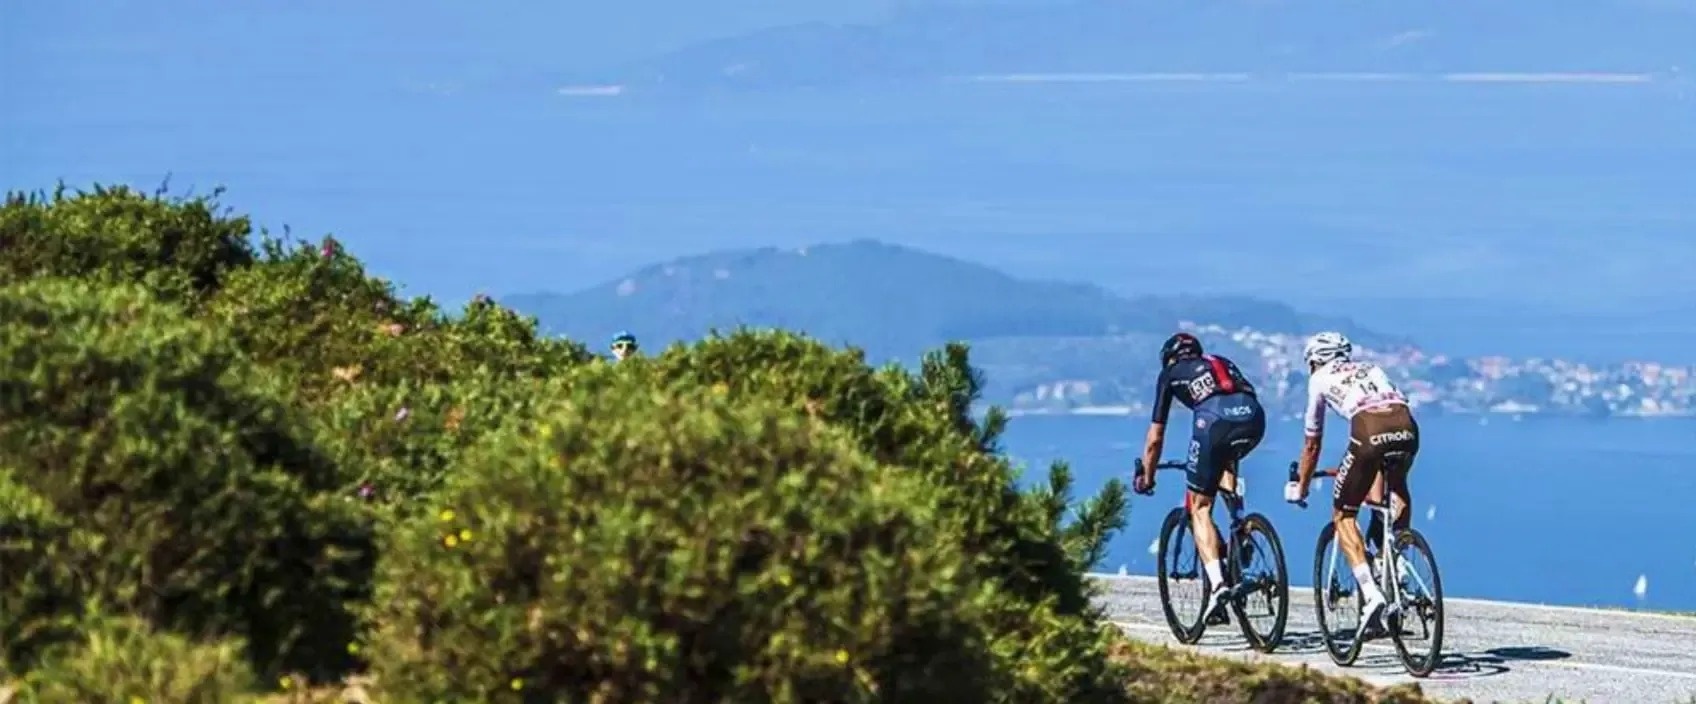 two people are riding bicycles down a hill near the ocean .